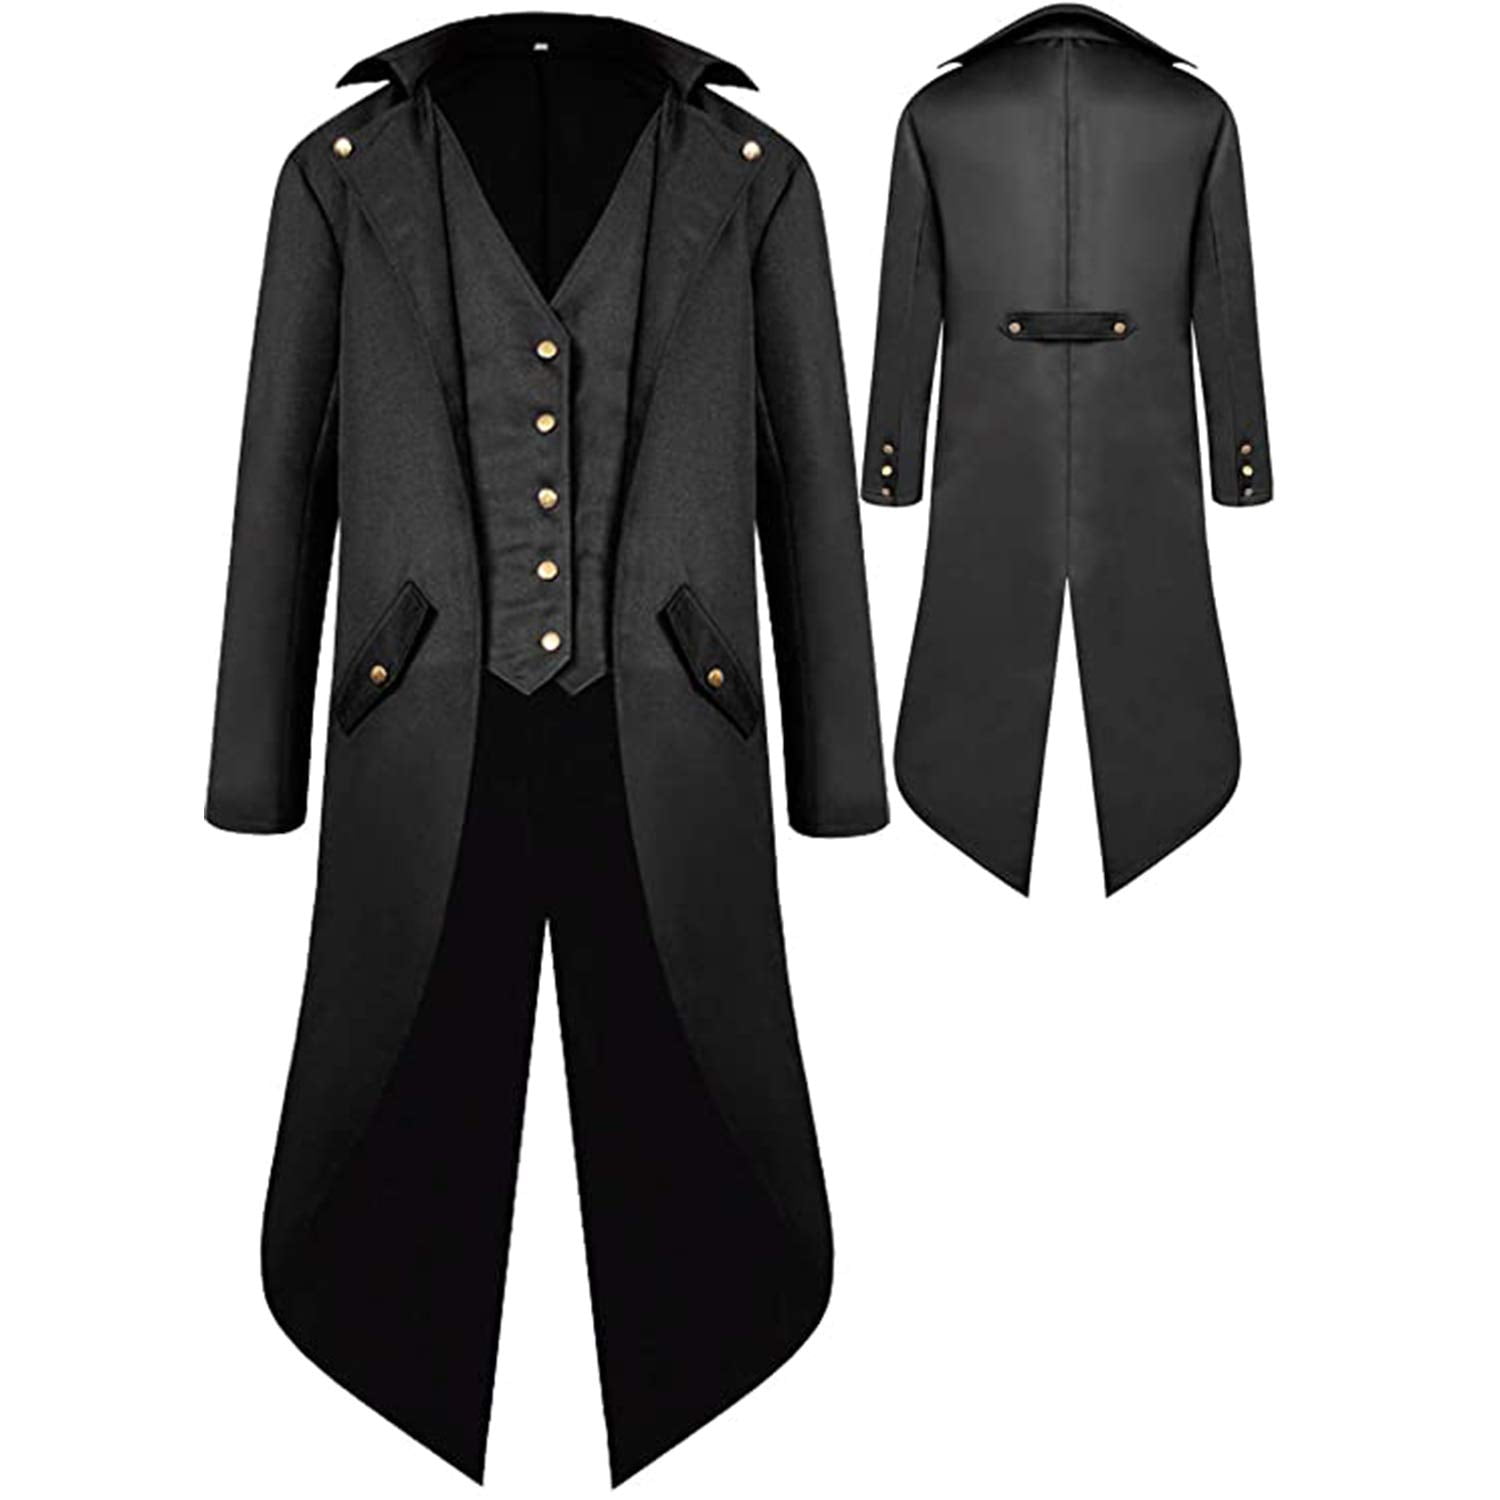 Nobility Baby Mens Steampunk Gothic Victorian Jacket Halloween Costumes 